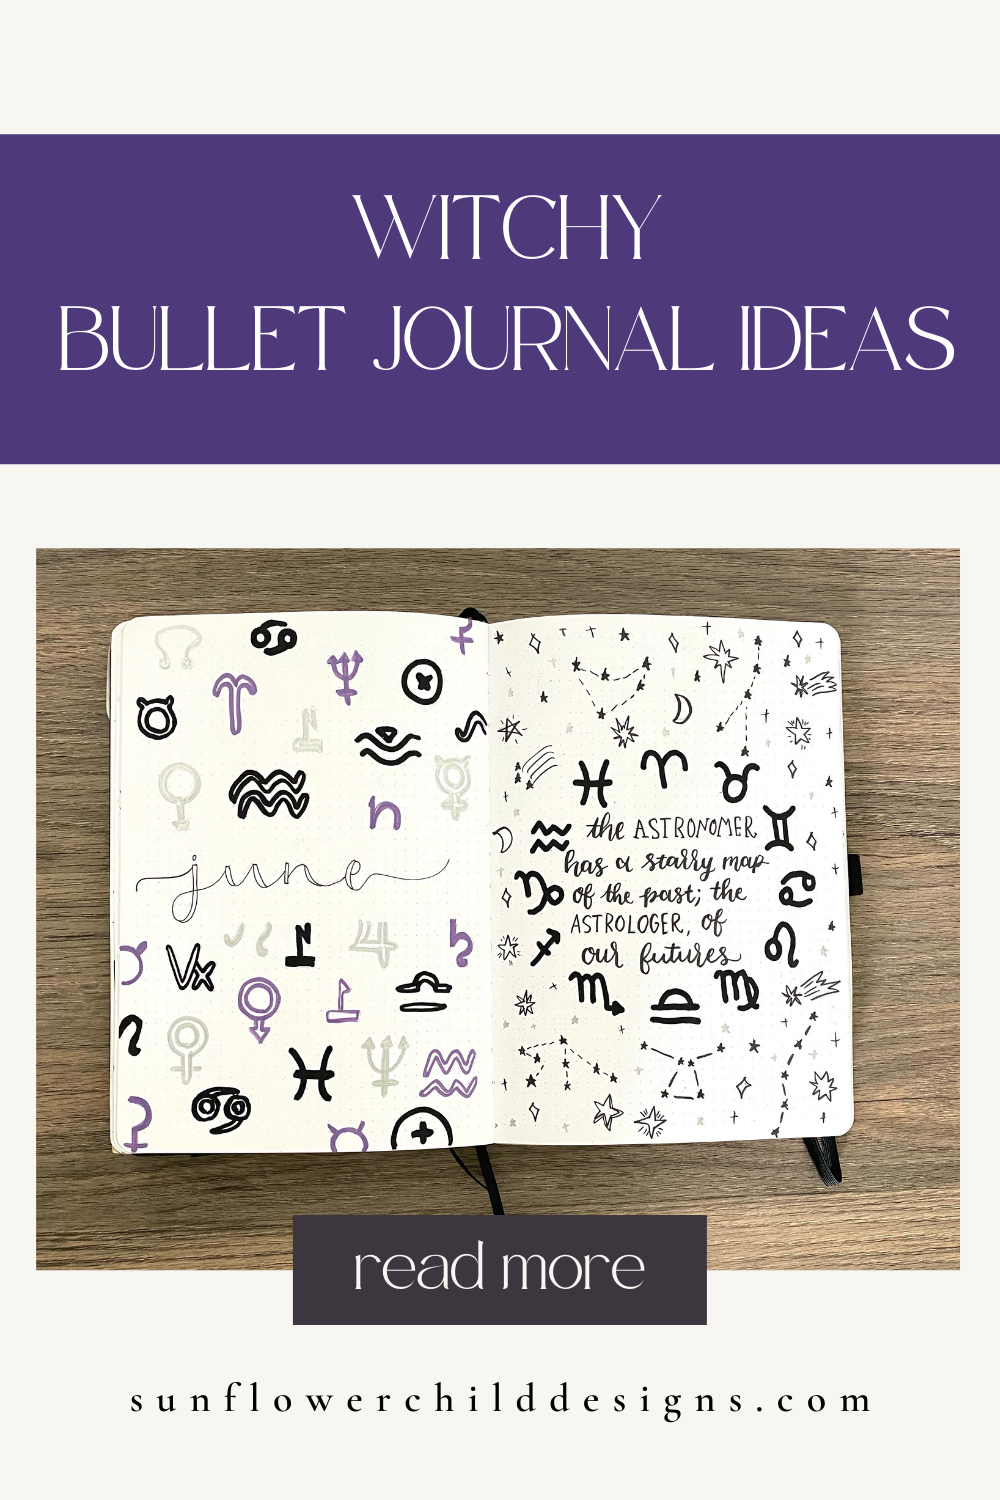 witchy-bullet-journal-ideas-june-bullet-journal-ideas 4.png